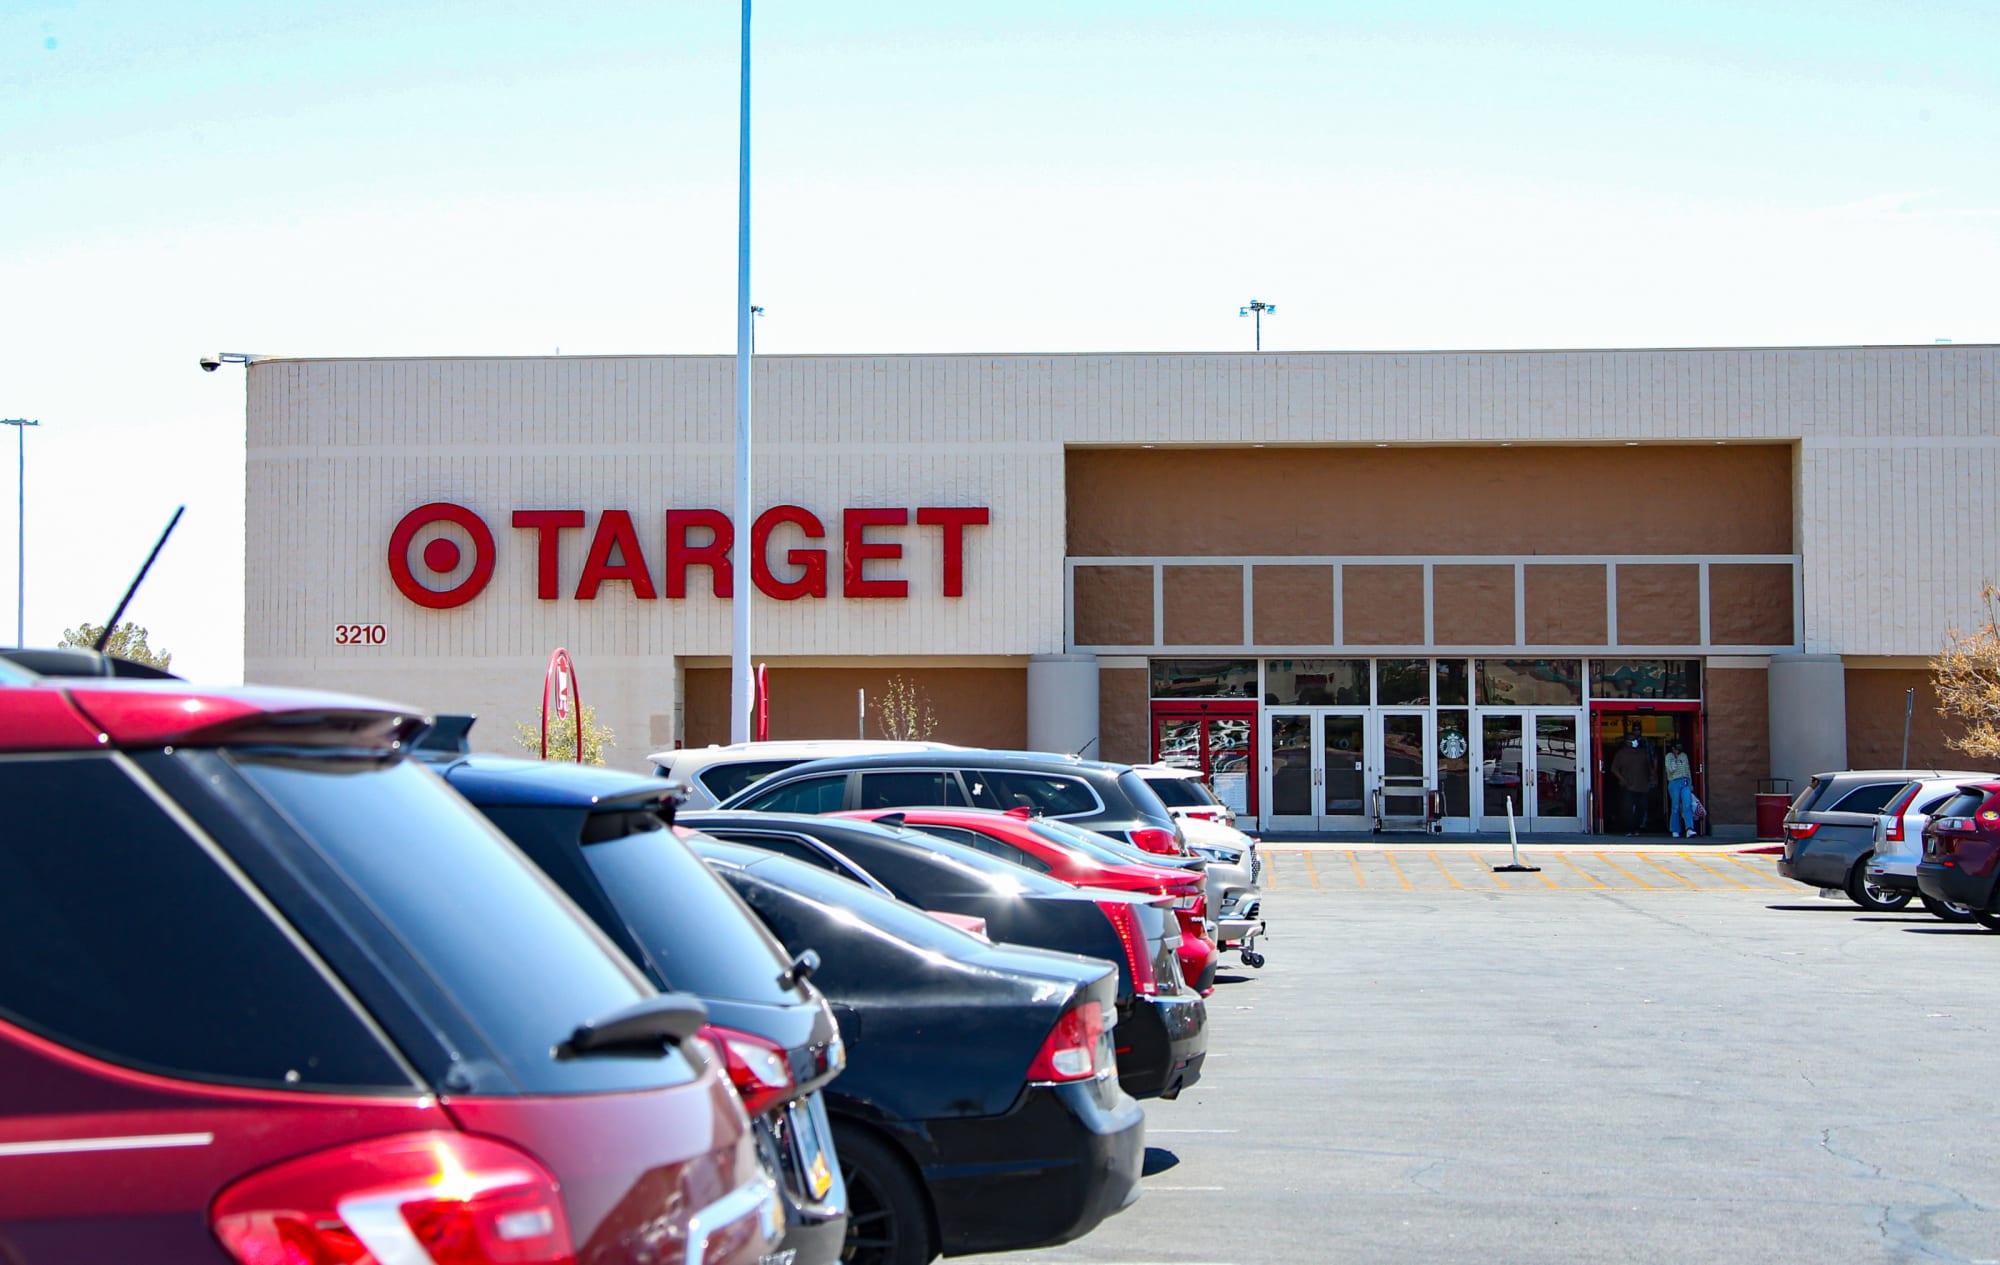 Target Memorial Day hours: (Updated May 2022) - FanSided